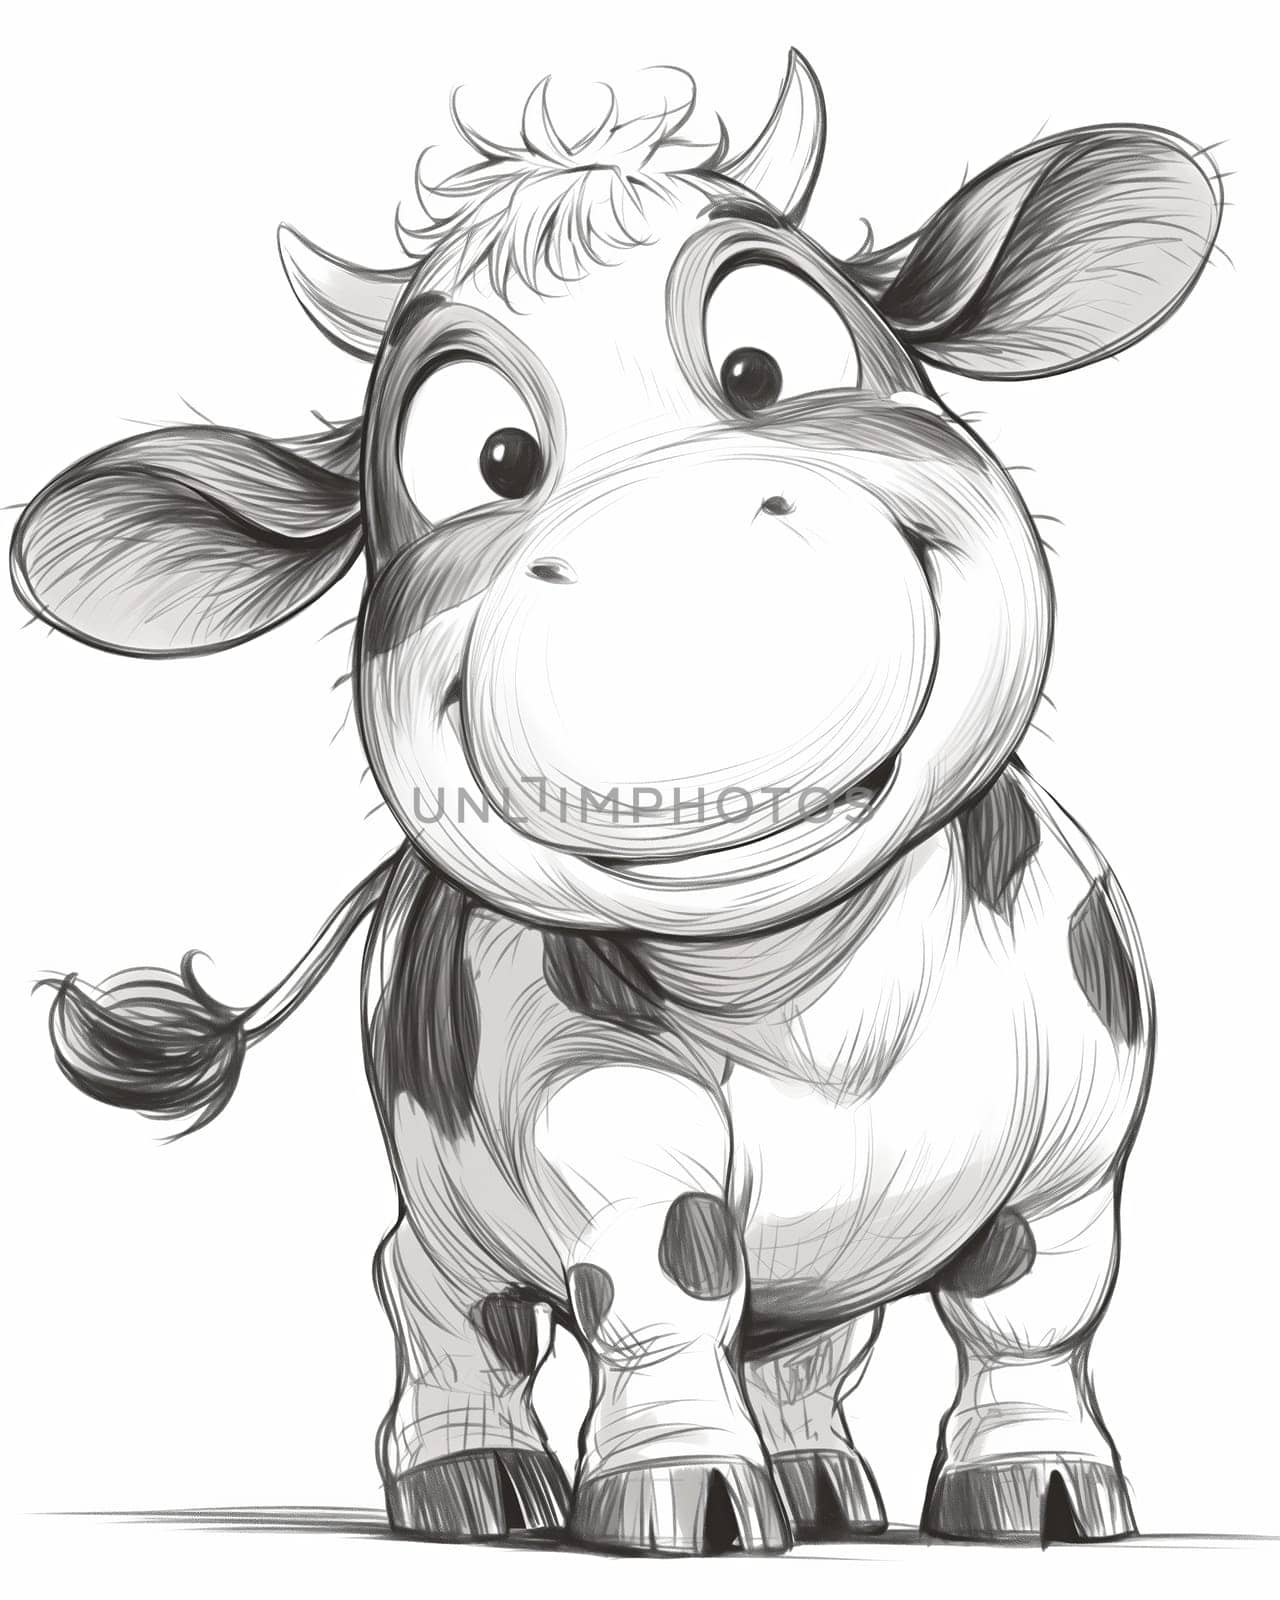 Coloring book for children, coloring animal, cow, bull. by Fischeron